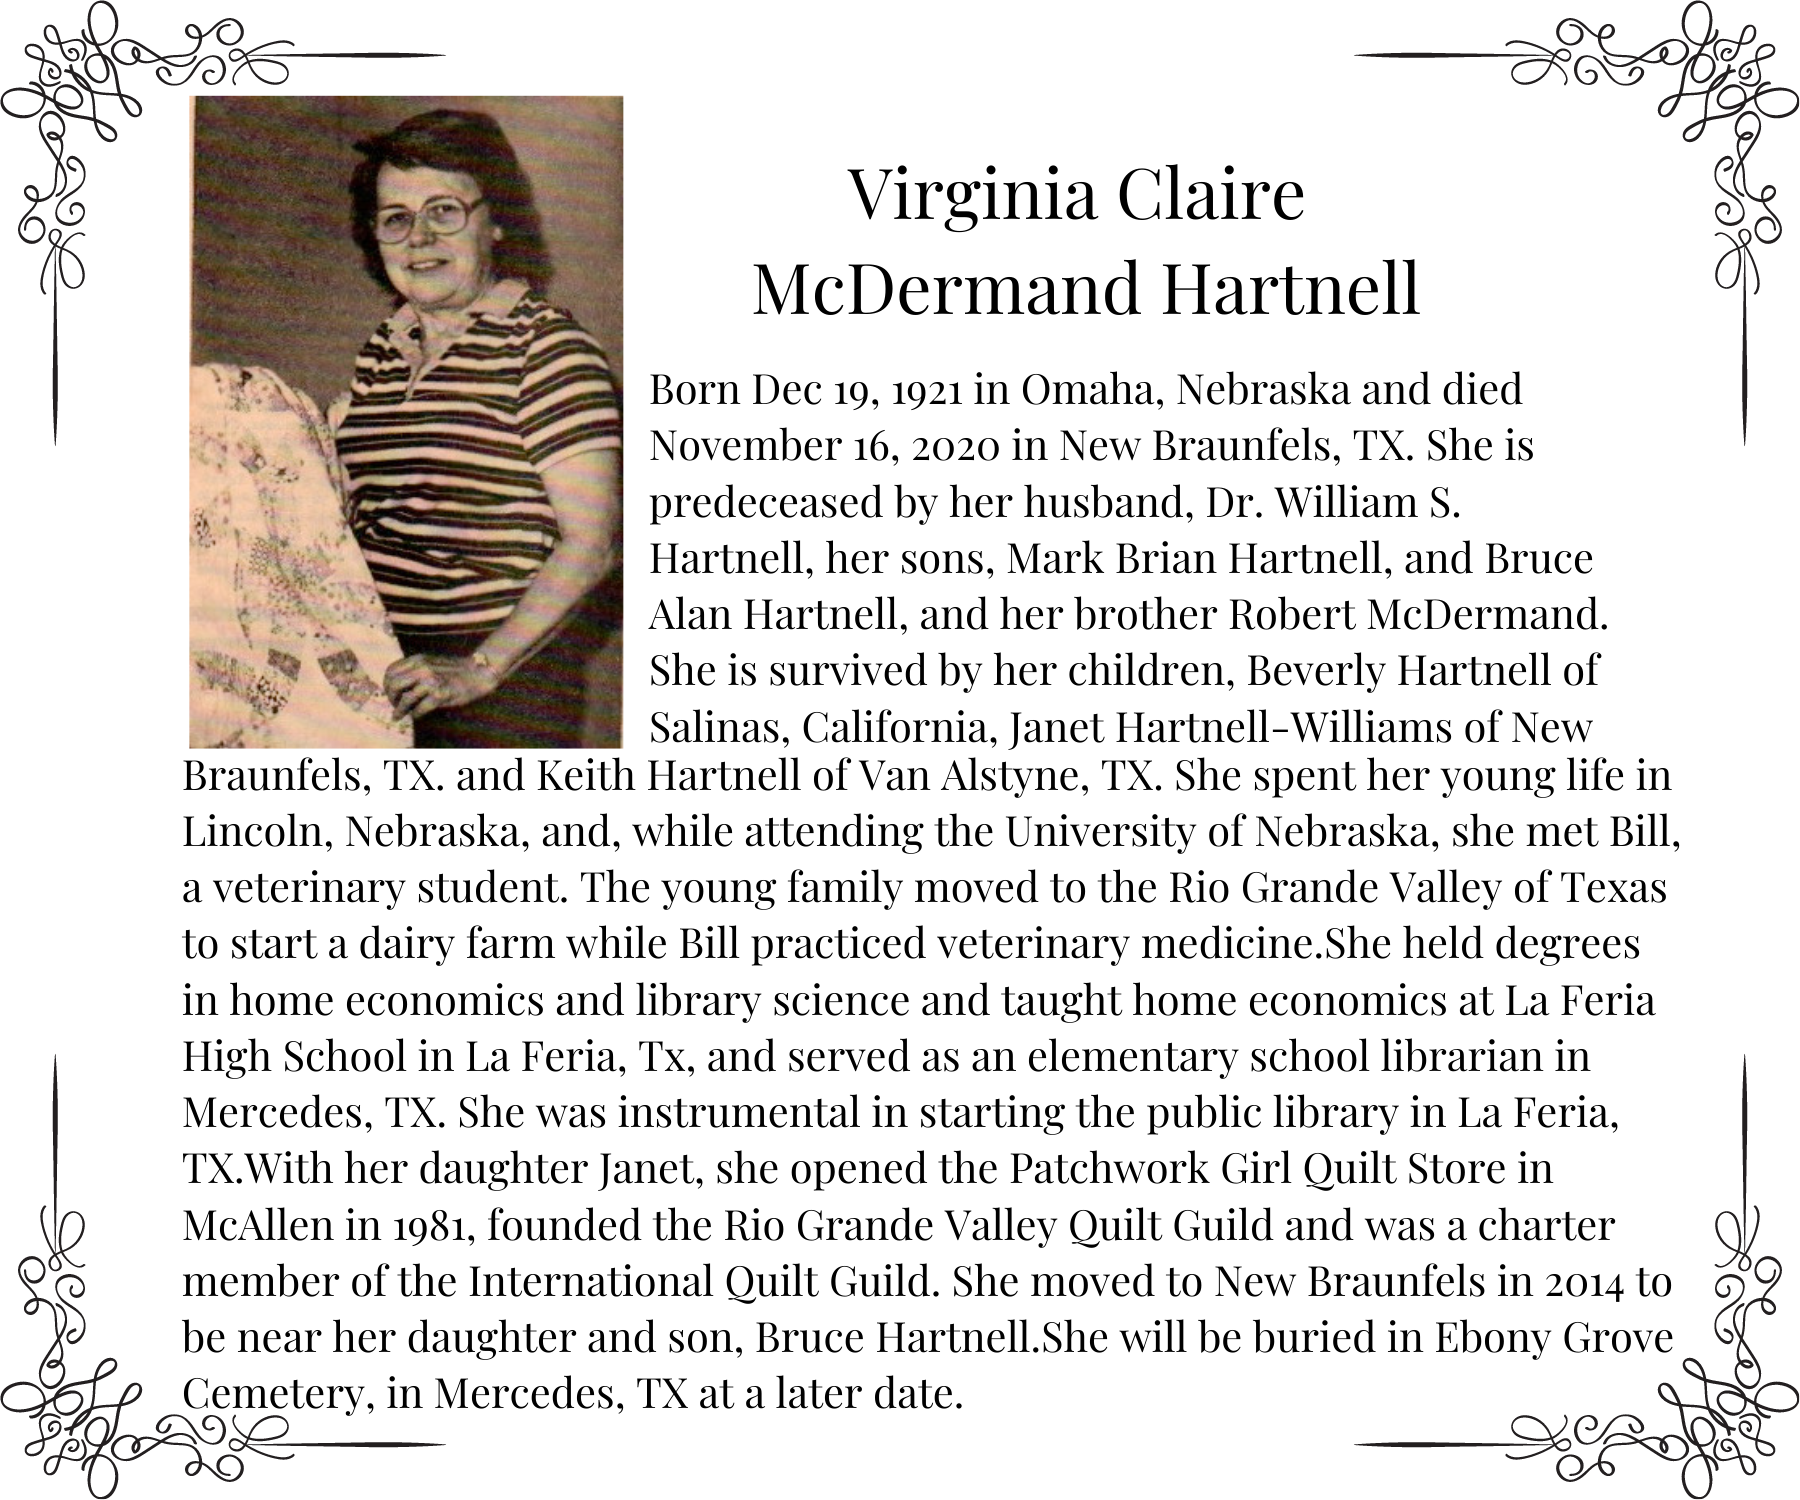 Virginia Claire McDermand Hartnell passes away